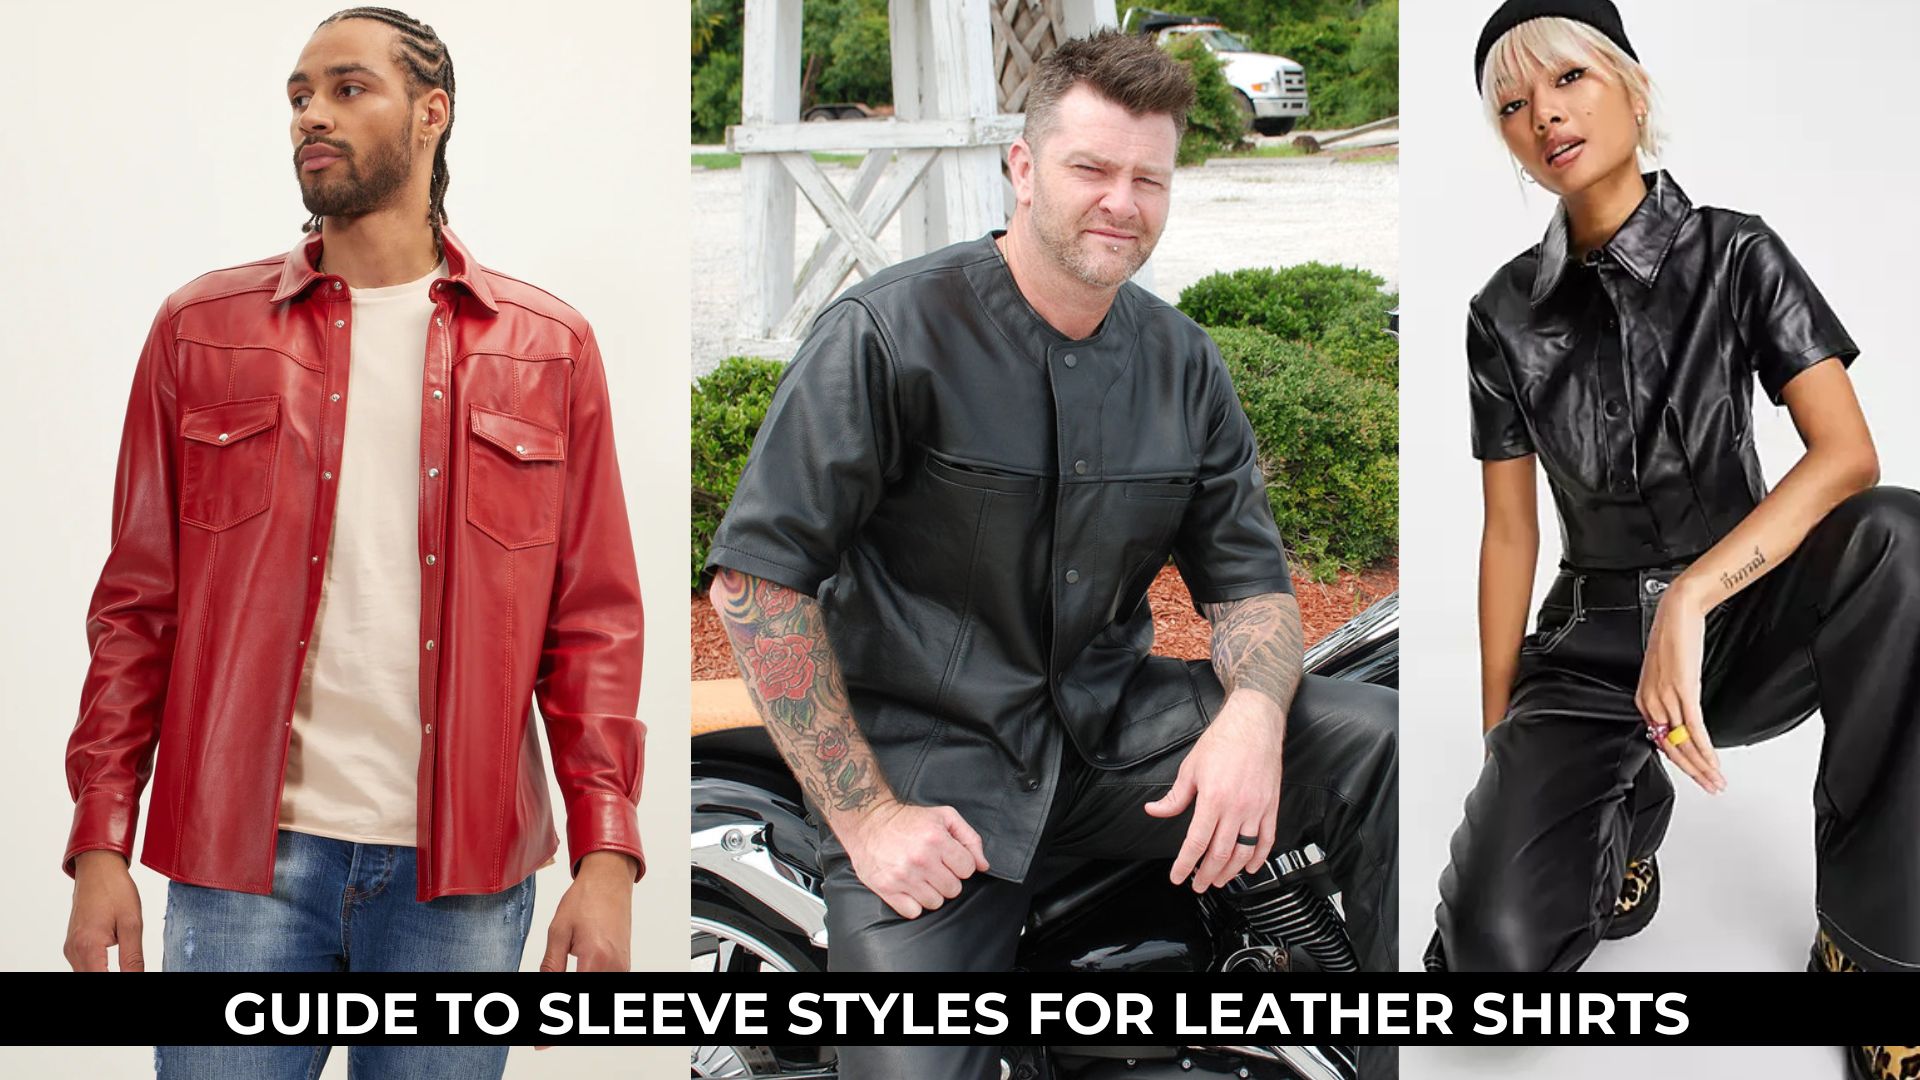 Guide to Sleeve Styles for Leather Shirts